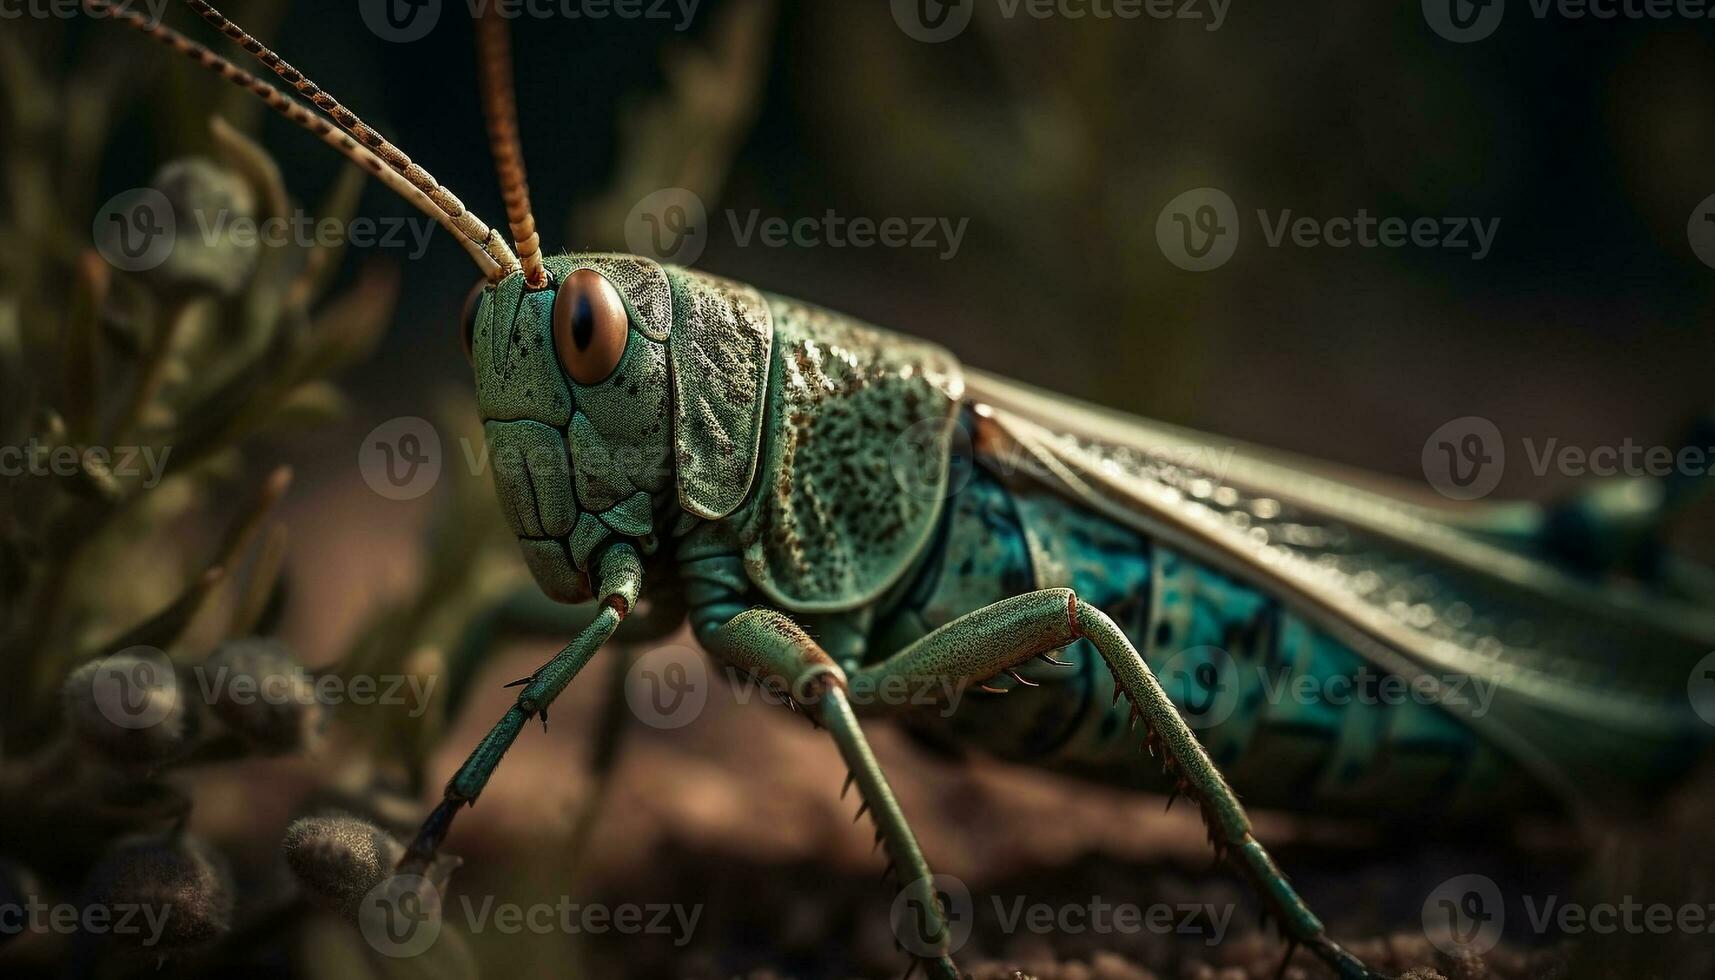 Green locust on leaf, magnified in nature generated by AI photo